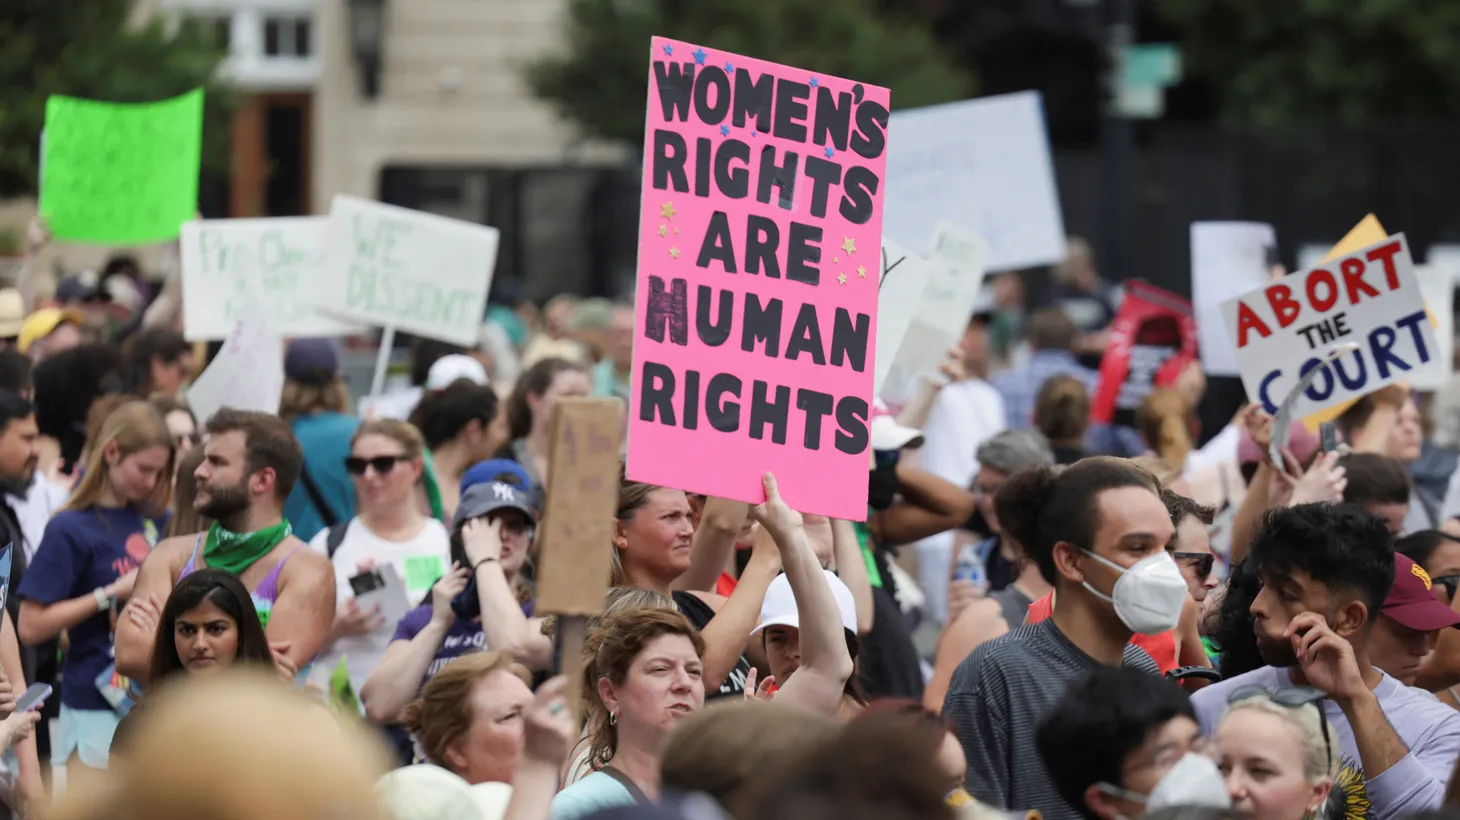 Activists hold signs that say, “Women’s rights are human rights” and “abort the court,” outside the U.S. Supreme Court as the justices overturn the landmark Roe v. Wade abortion decision in Washington, U.S., June 24, 2022.